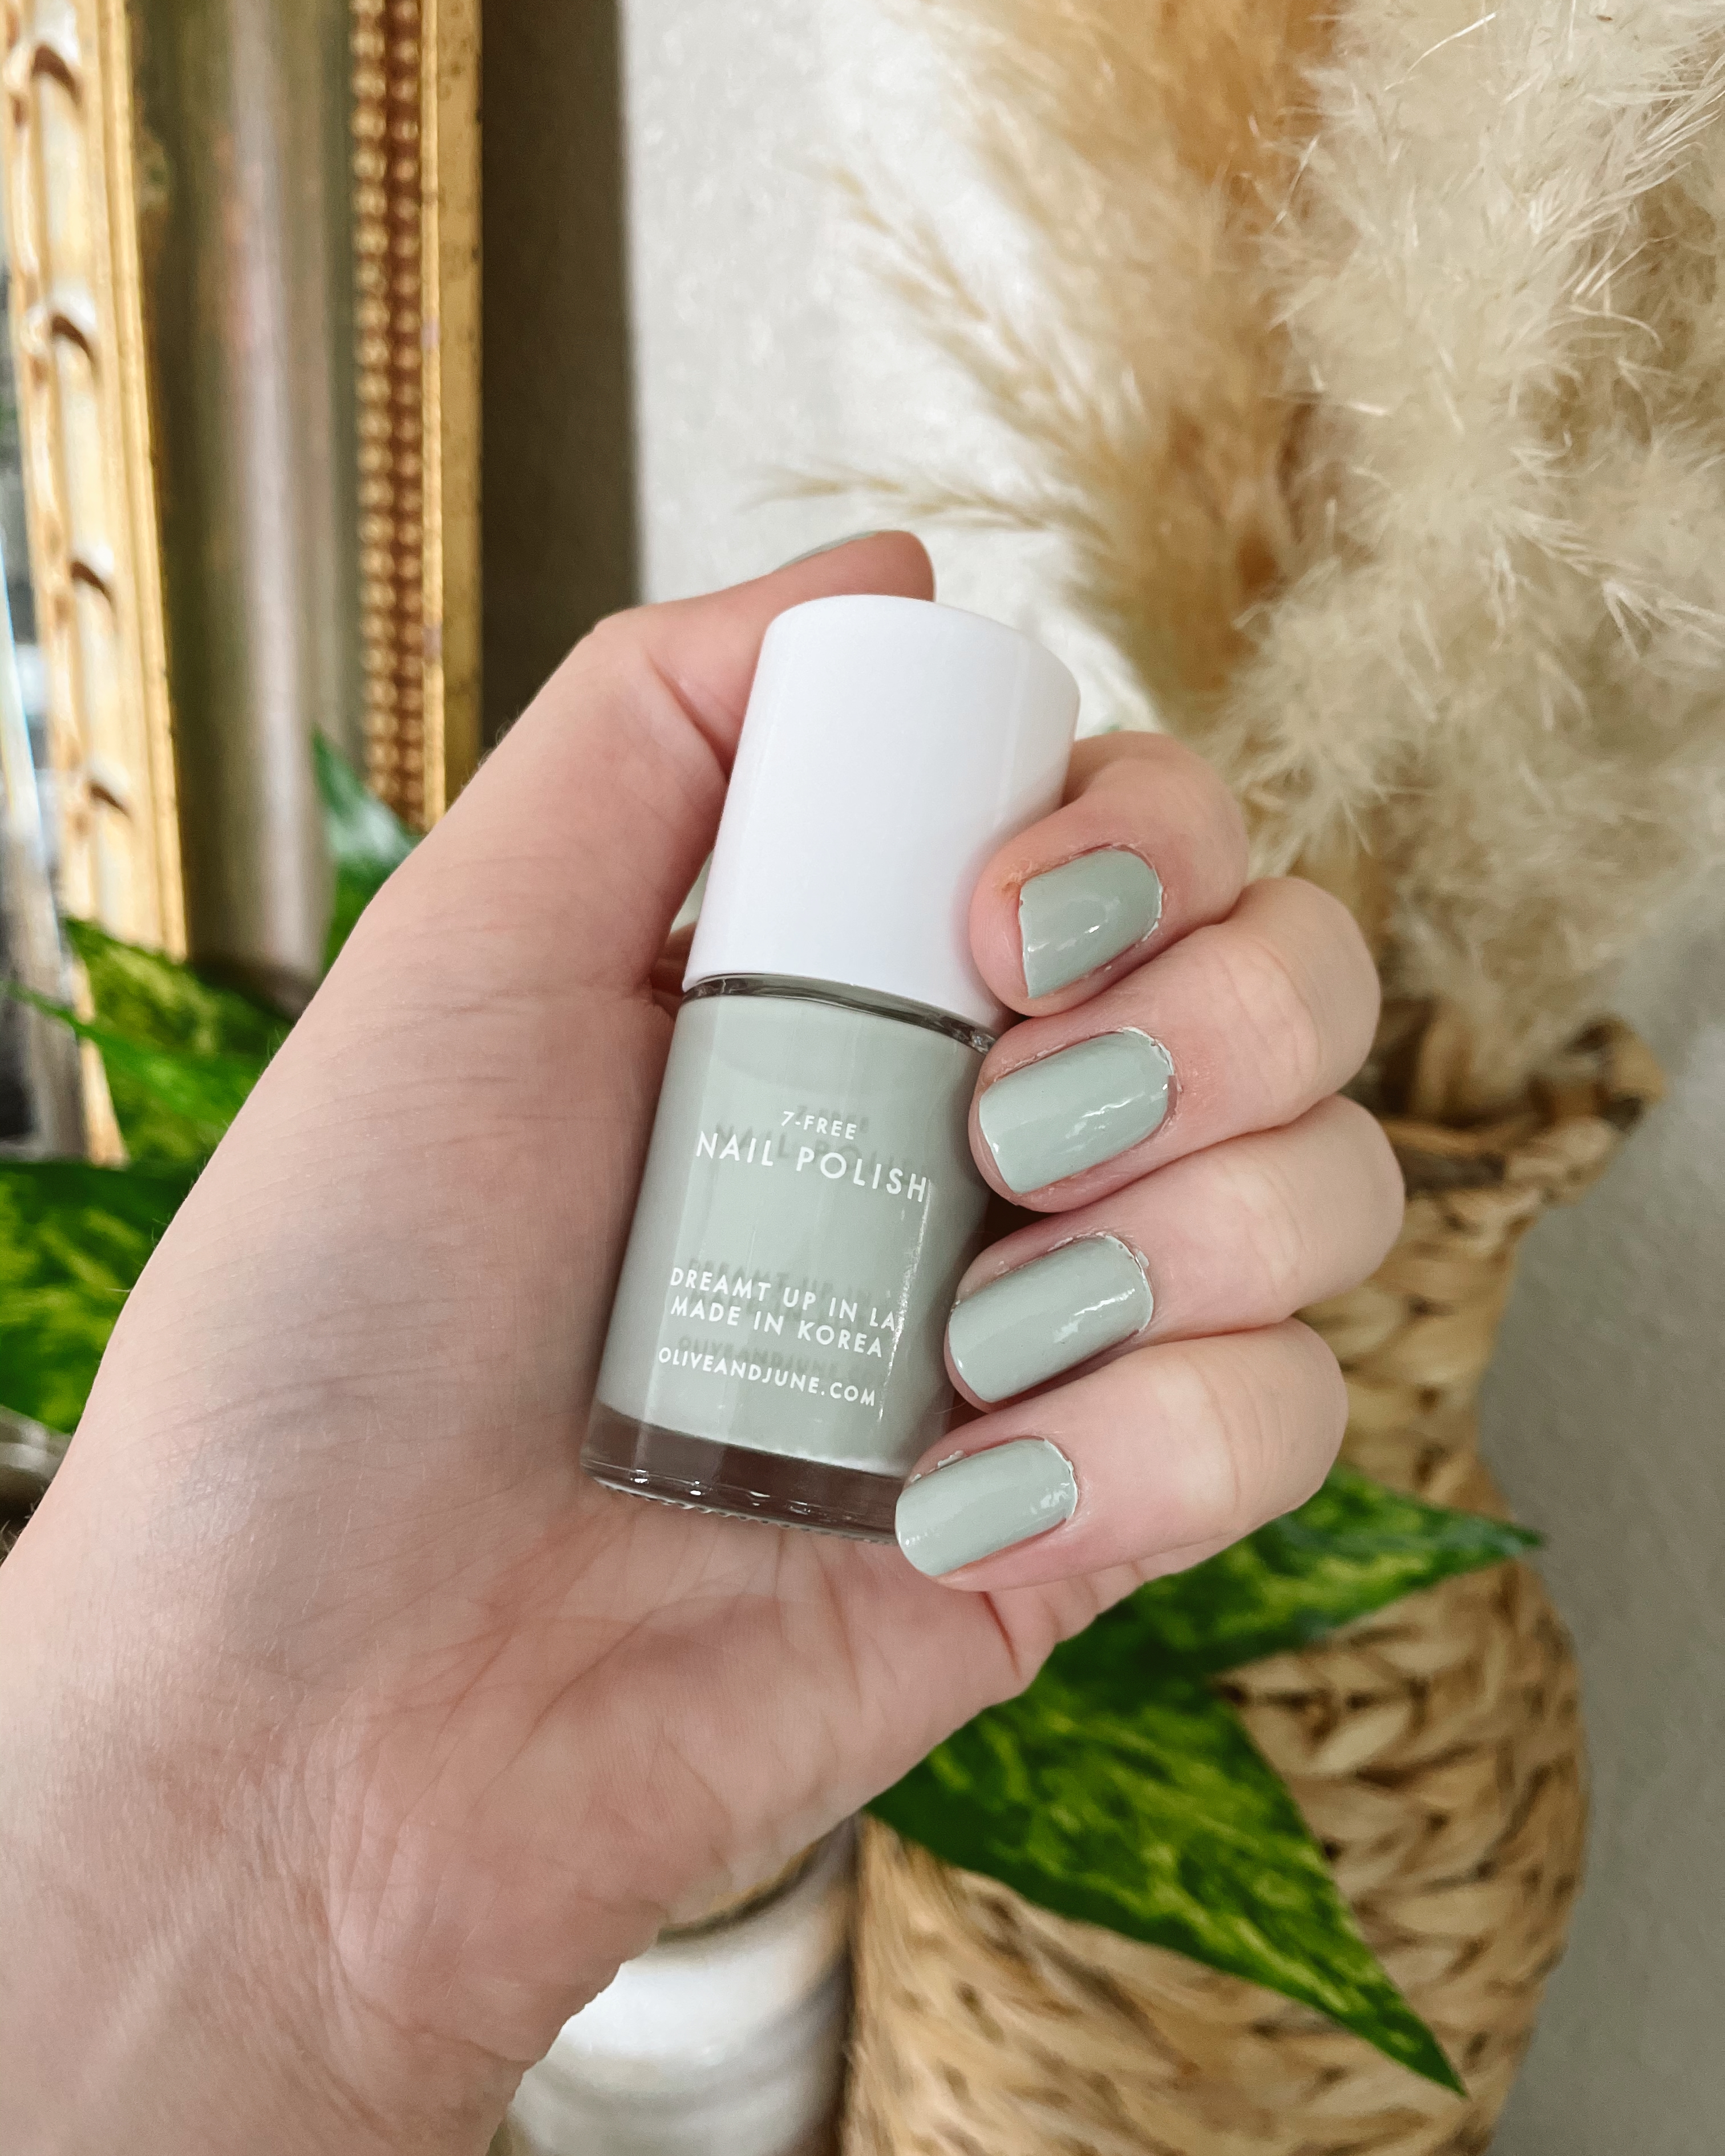 Olive & June Manicure Review - Affordable by Amanda